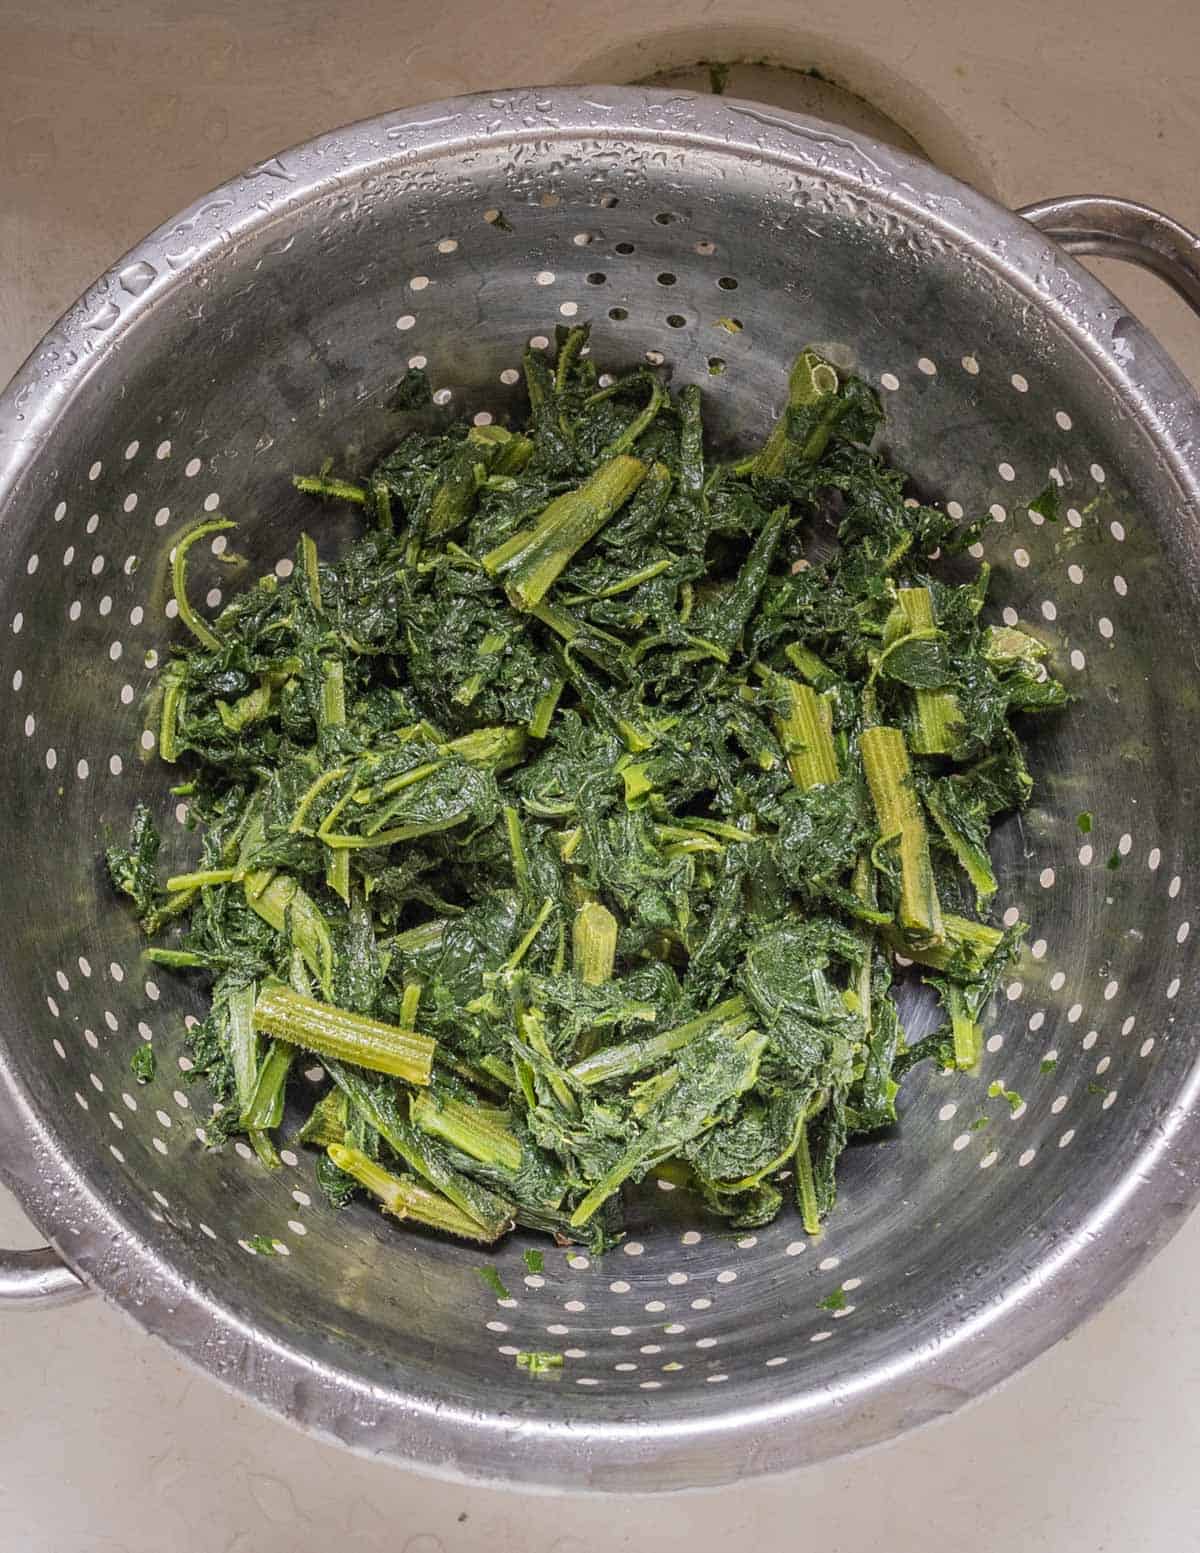 cooked foraged greens draining in a colander.